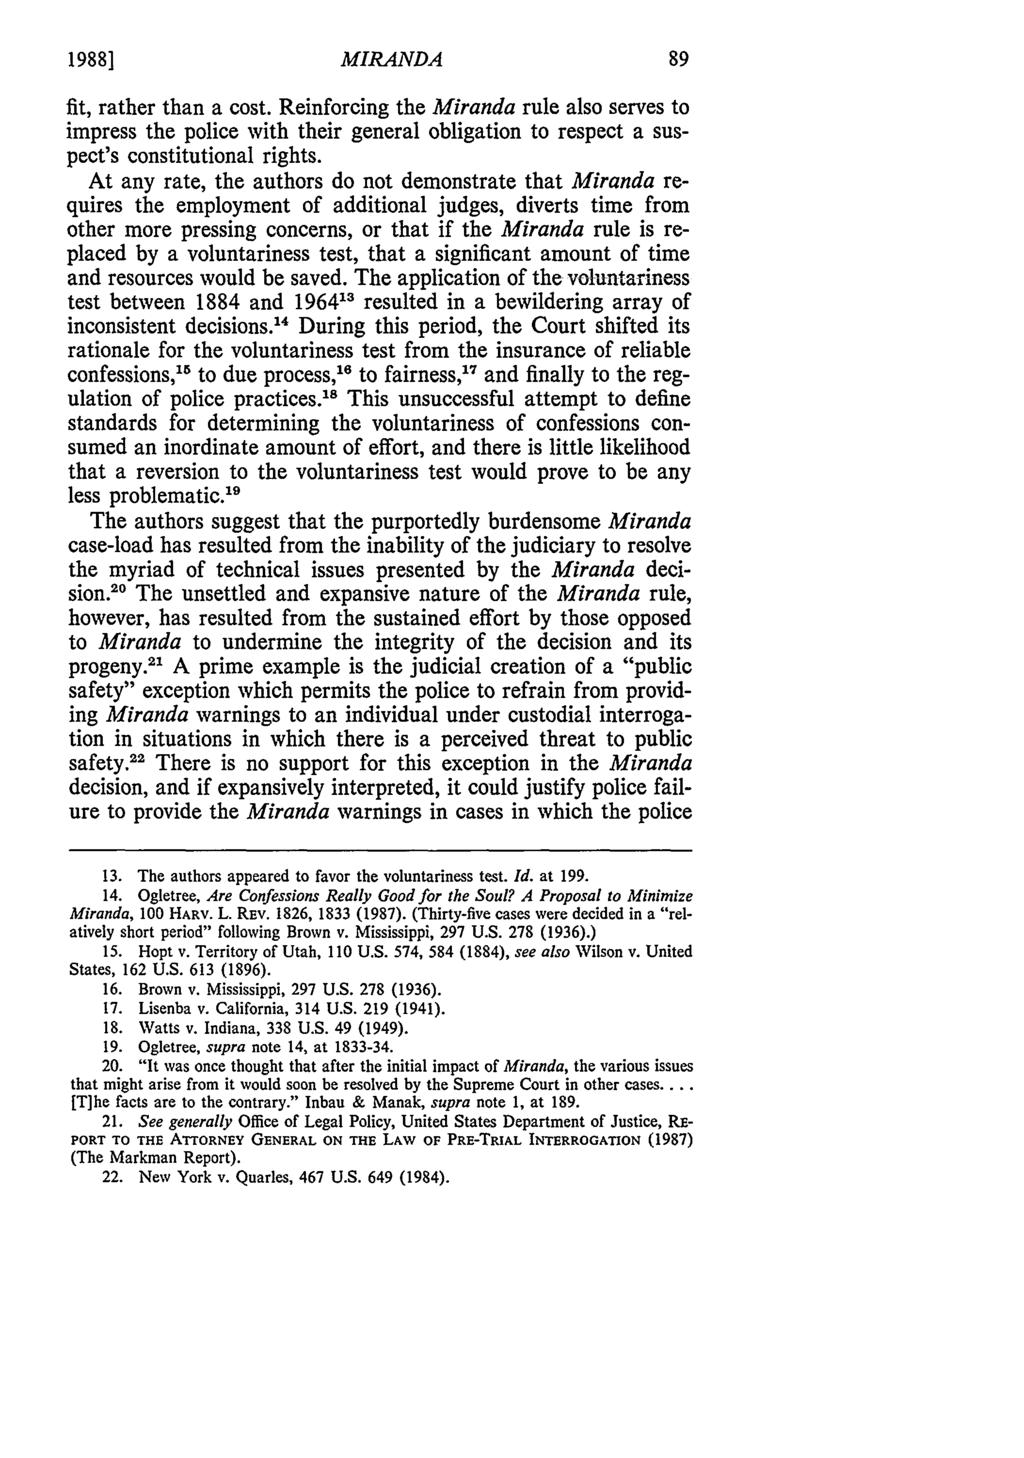 1988] Lippman: OPINION OF A SCHOLAR - A Commentary on Inbau and Manak's "Miranda MIRANDA fit, rather than a cost.